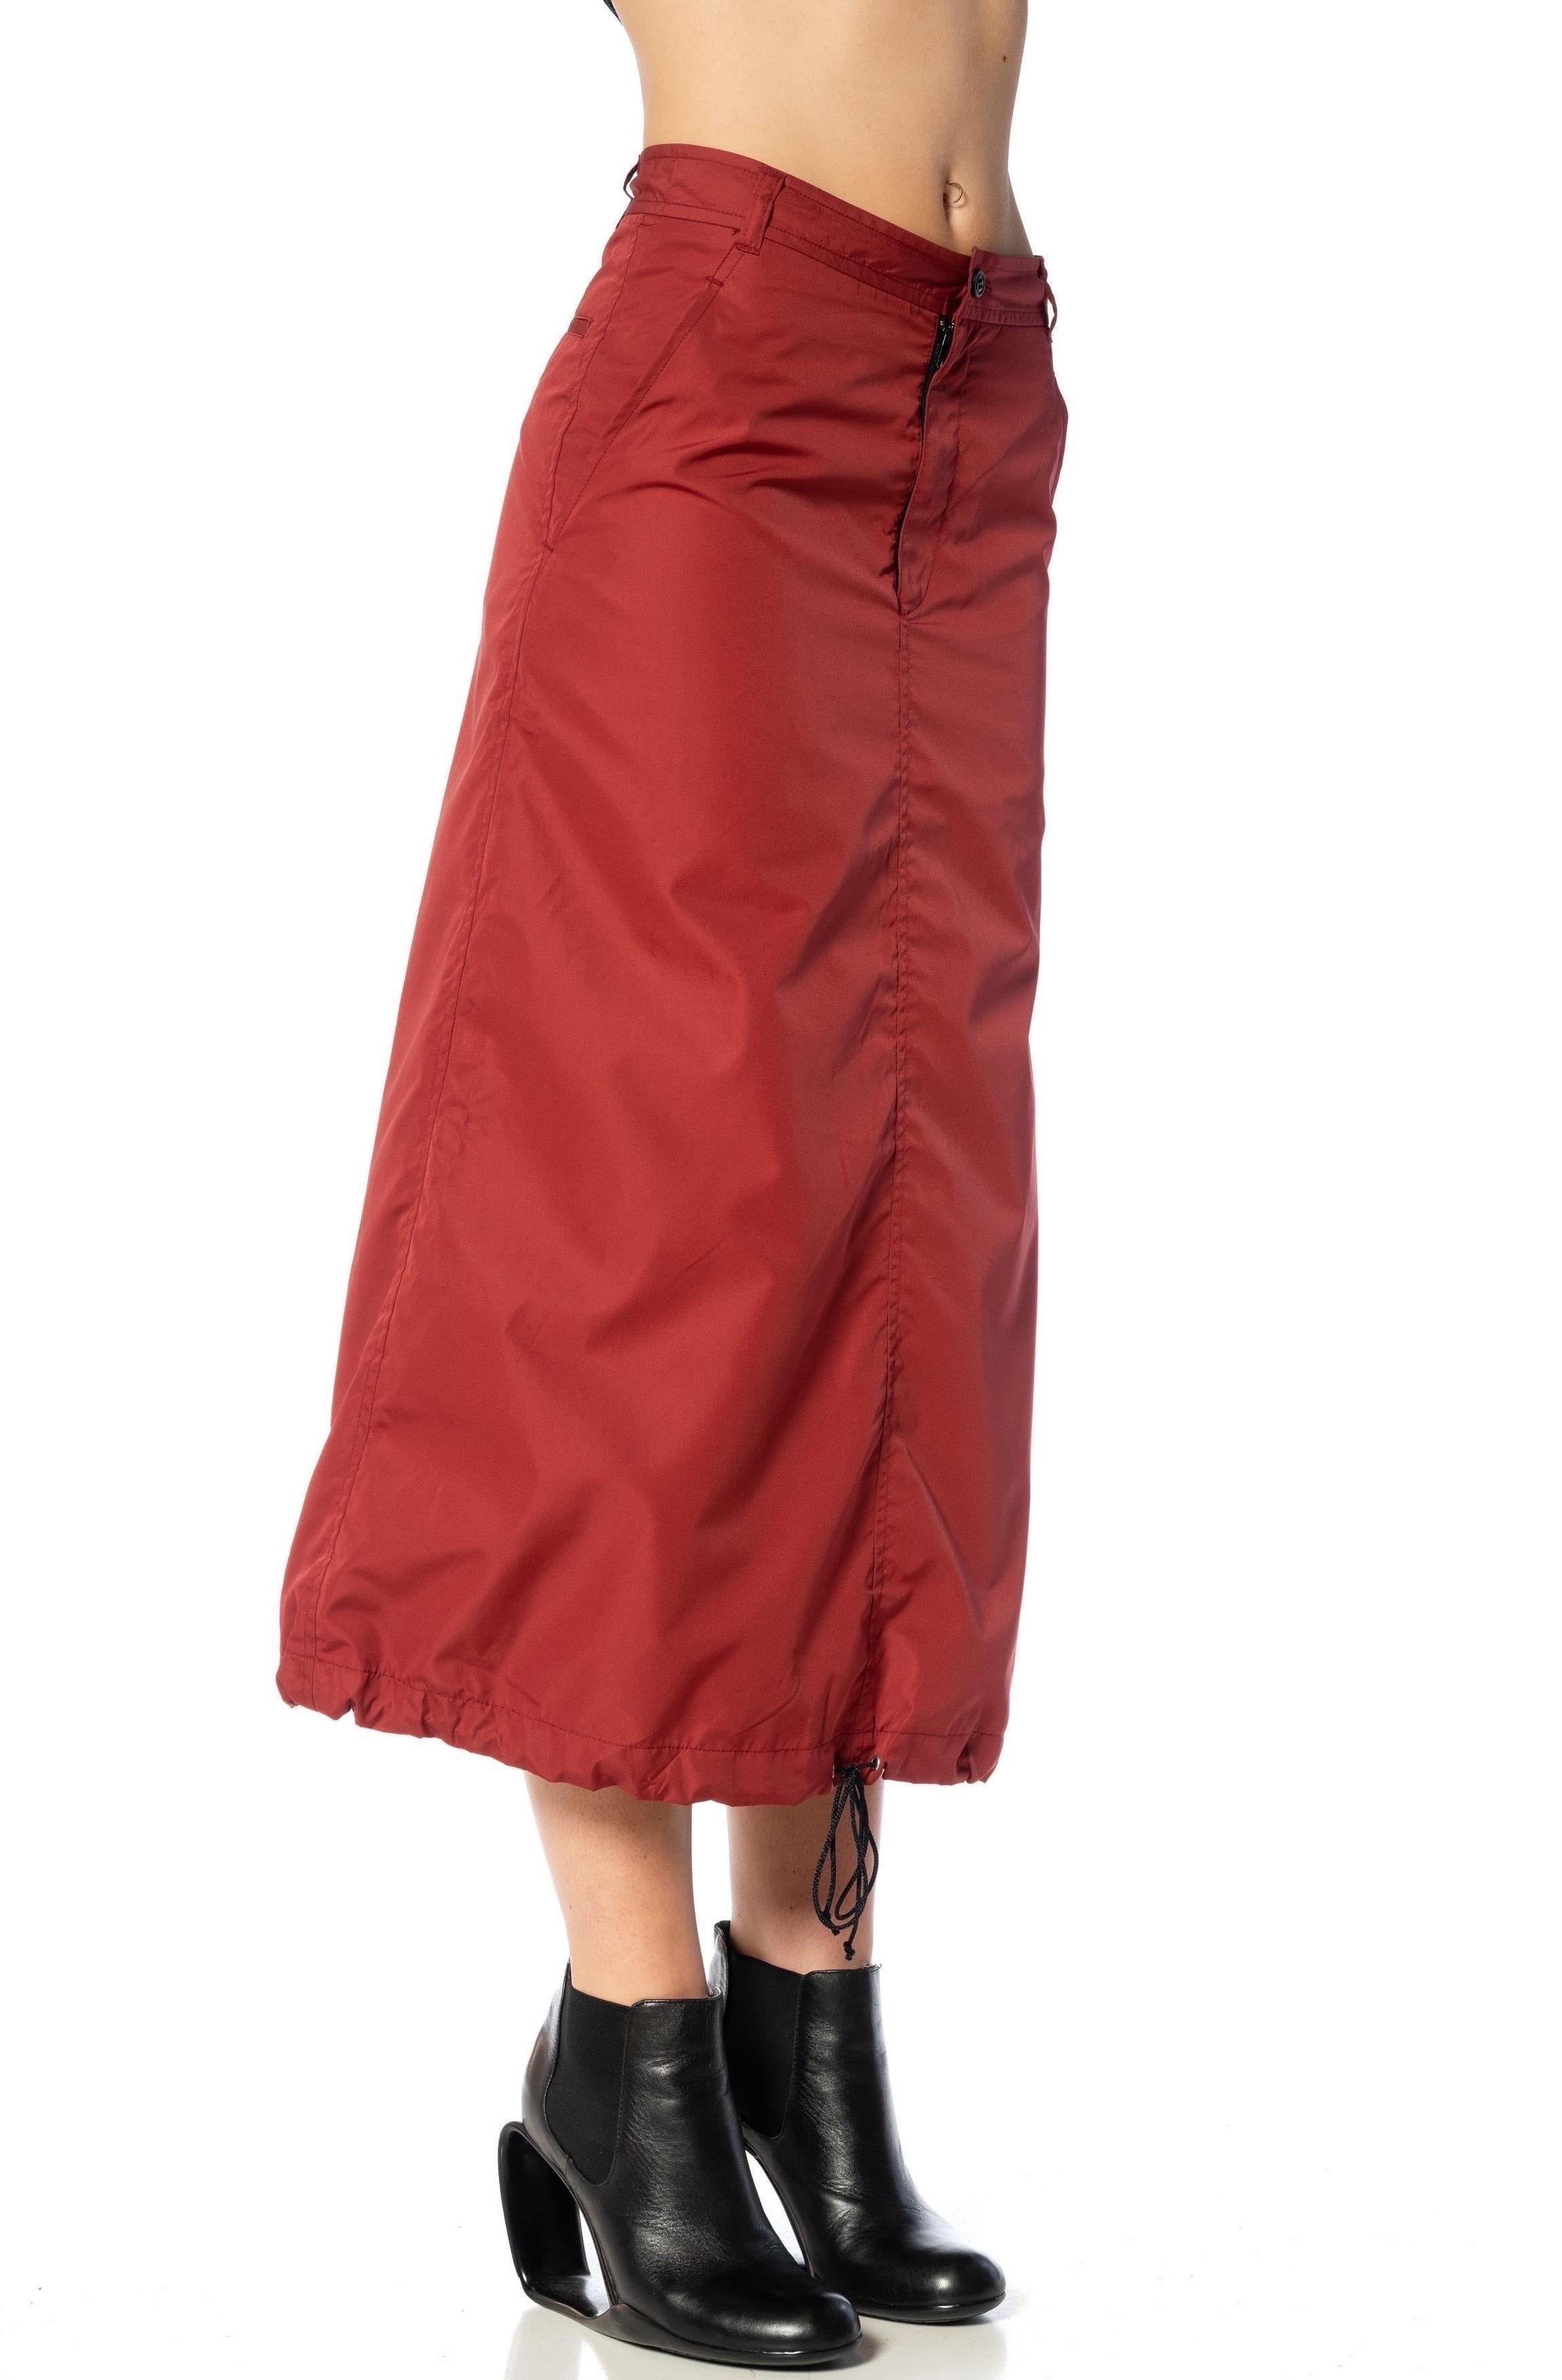 2000S COMME DES GARCONS Burgundy Polyester Parachute Skirt With Drawstring Hem  For Sale 5